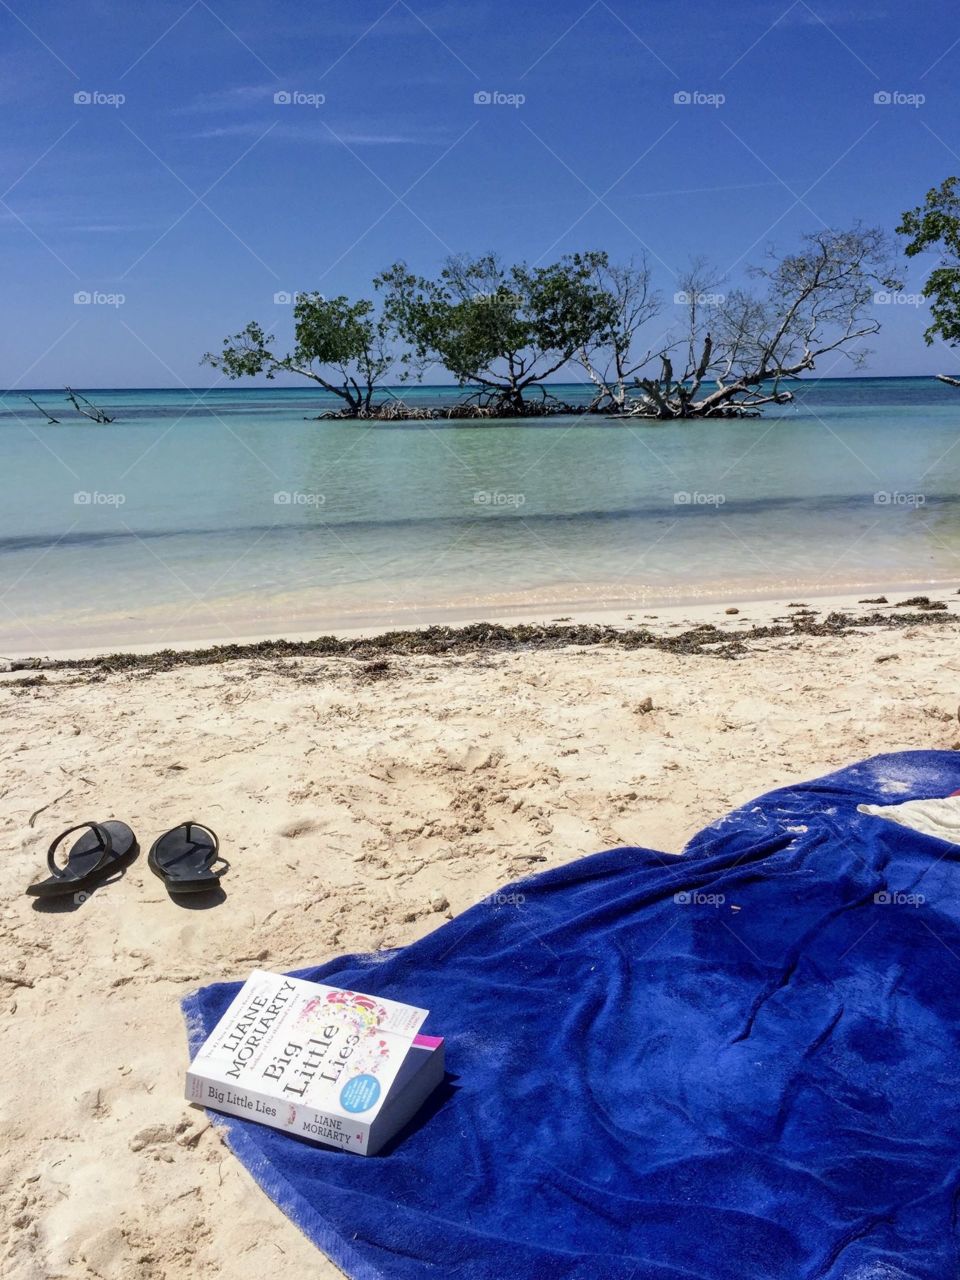 A book and the ocean can’t ask for anything more!